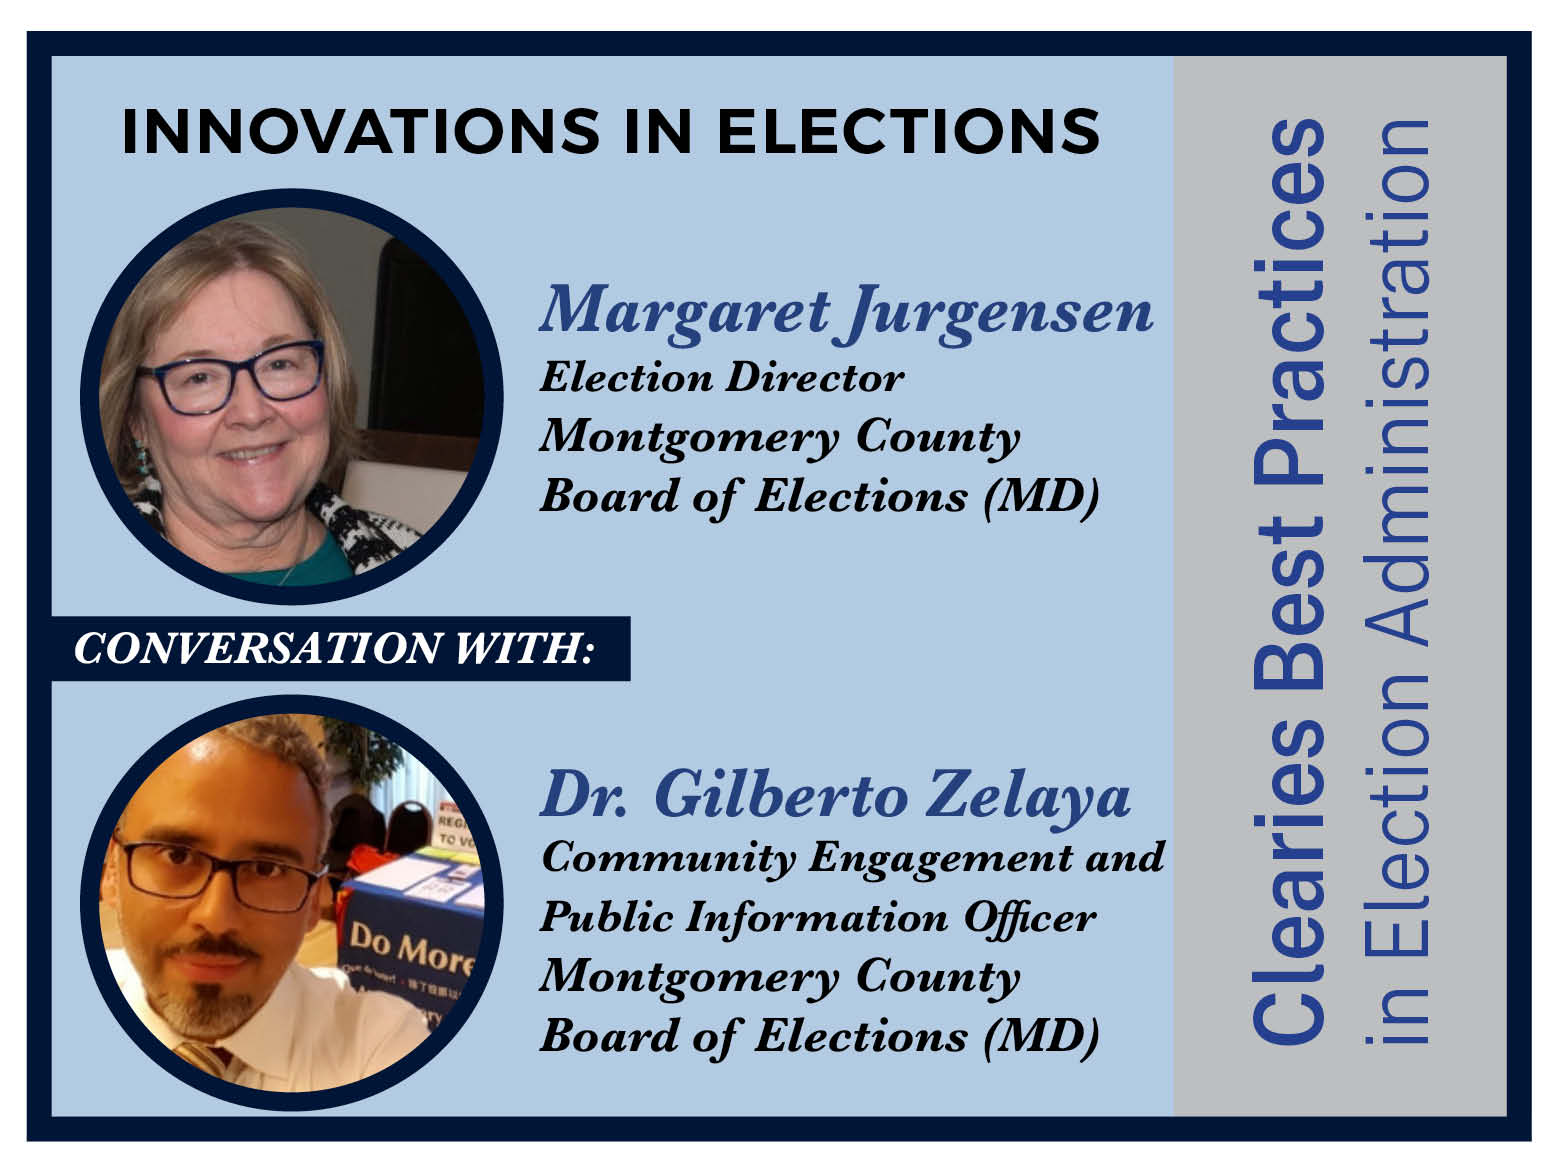 Clearies Best Practices conversation with Margaret Jurgensen and Dr. Gilberto Zelaya Montgomery County Board of Elections